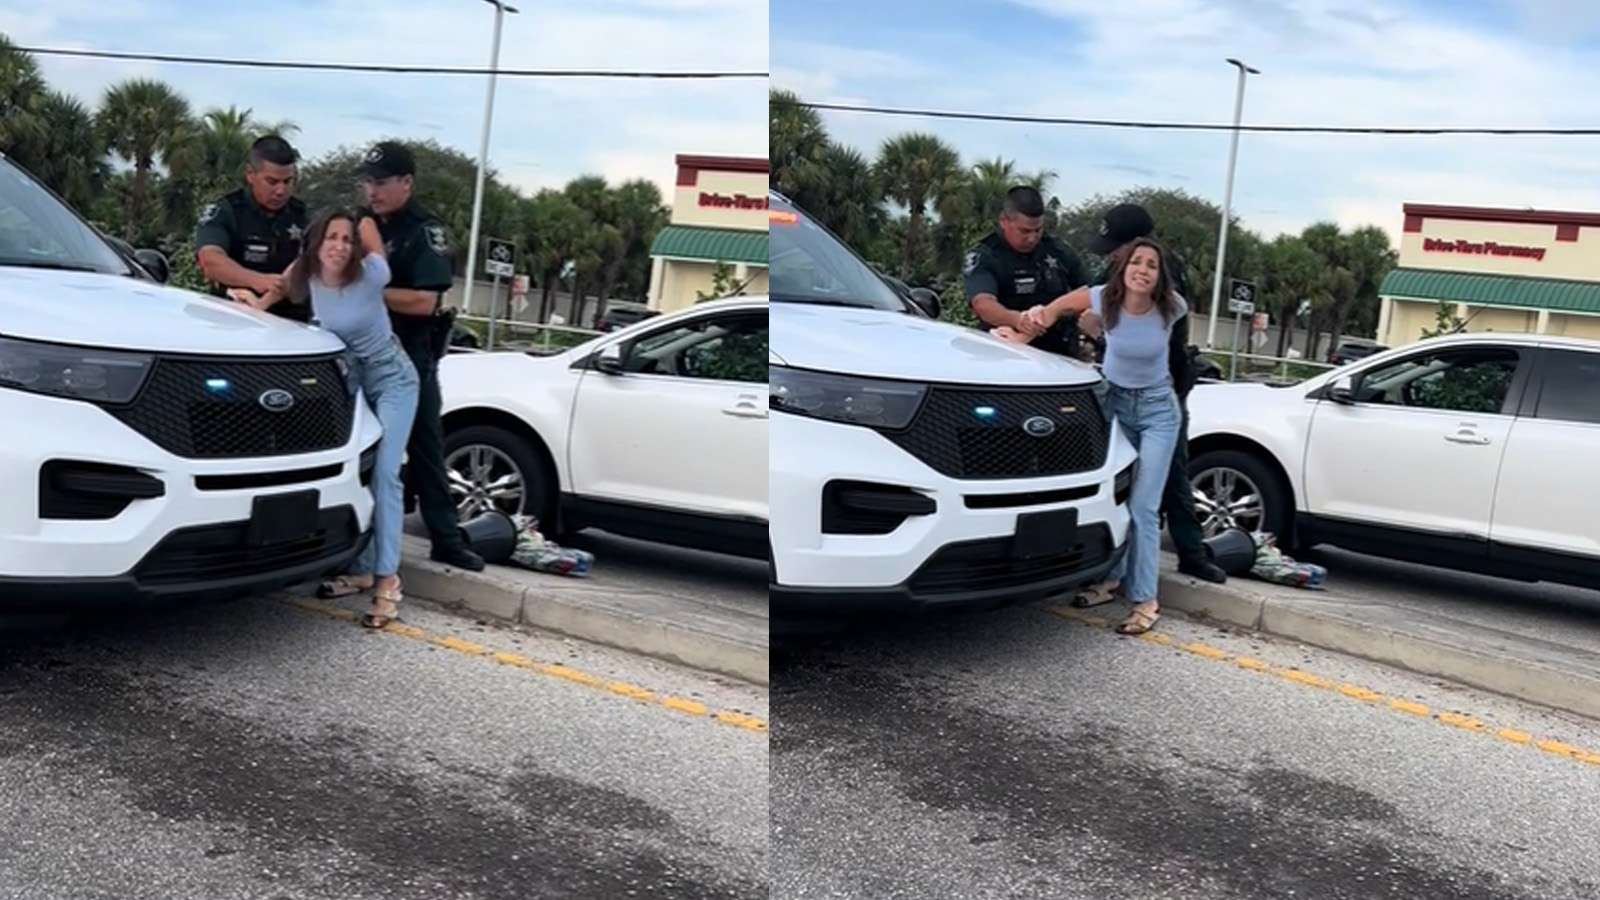 TikTok shows the moment woman is arrested after giving $20 to a flower vendor